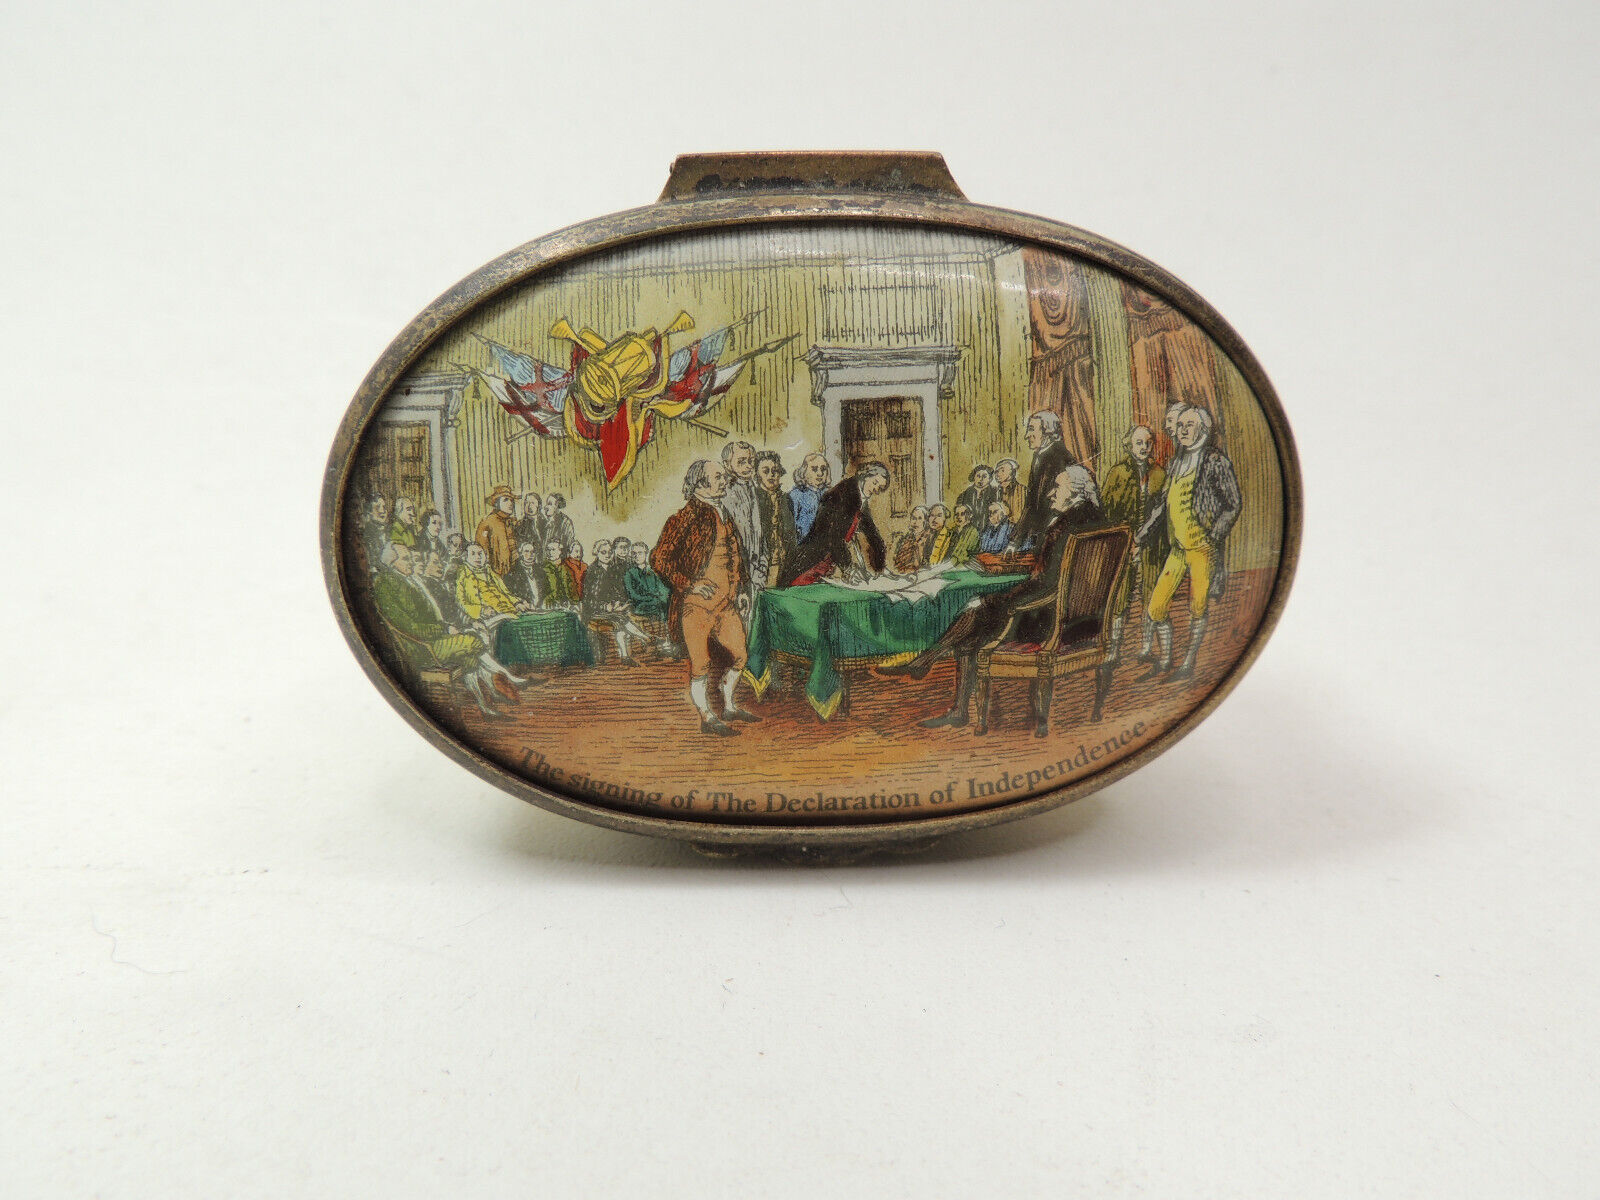 Bilston Battersea Signing of The Declaration of Independence Trinket Box 150/250